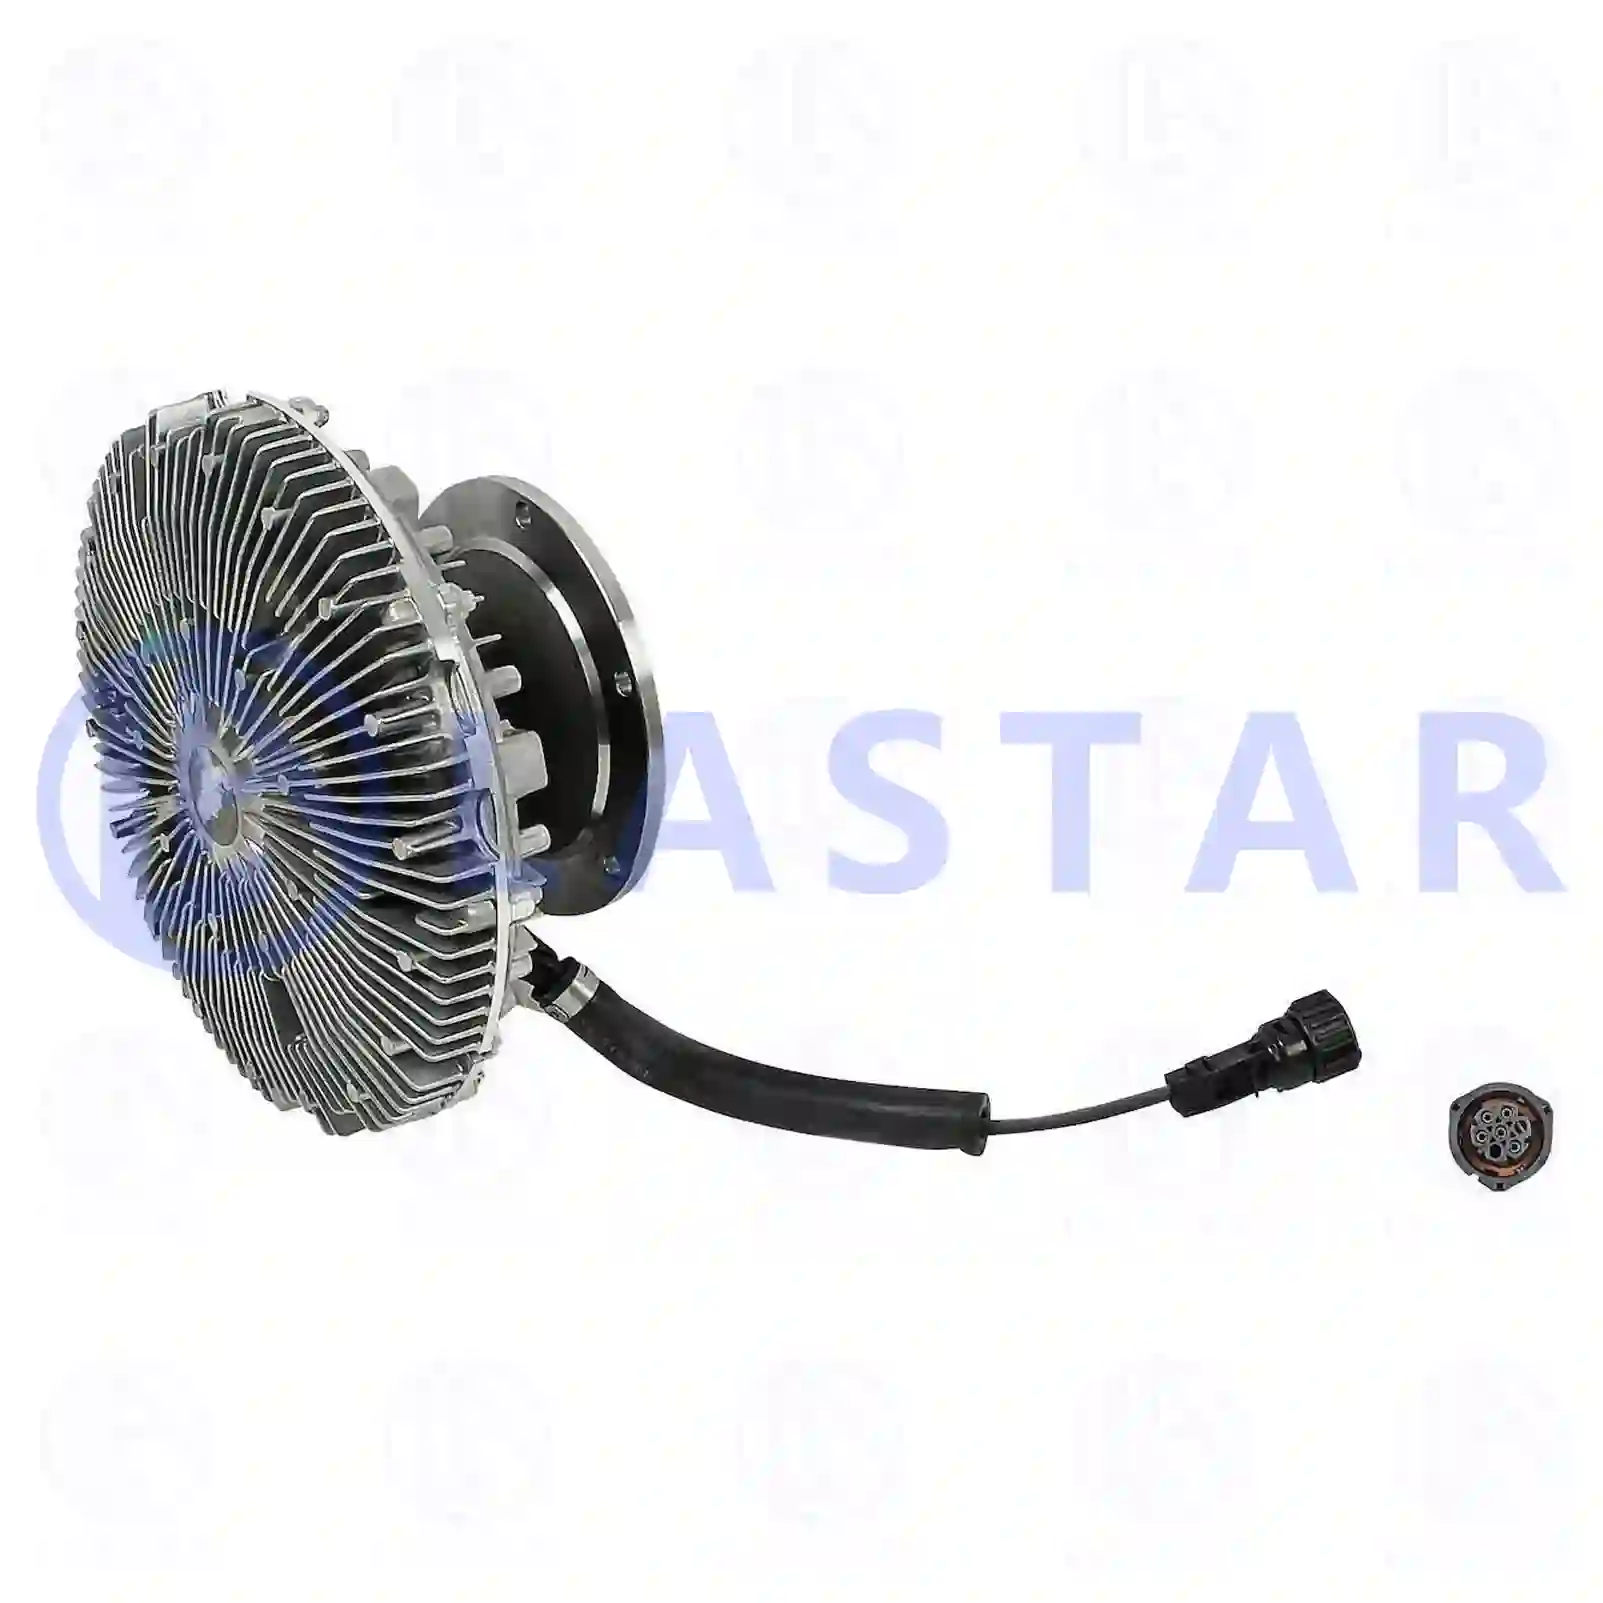 Fan clutch, 77708098, 0002007722, 4572000722, 4572000822 ||  77708098 Lastar Spare Part | Truck Spare Parts, Auotomotive Spare Parts Fan clutch, 77708098, 0002007722, 4572000722, 4572000822 ||  77708098 Lastar Spare Part | Truck Spare Parts, Auotomotive Spare Parts